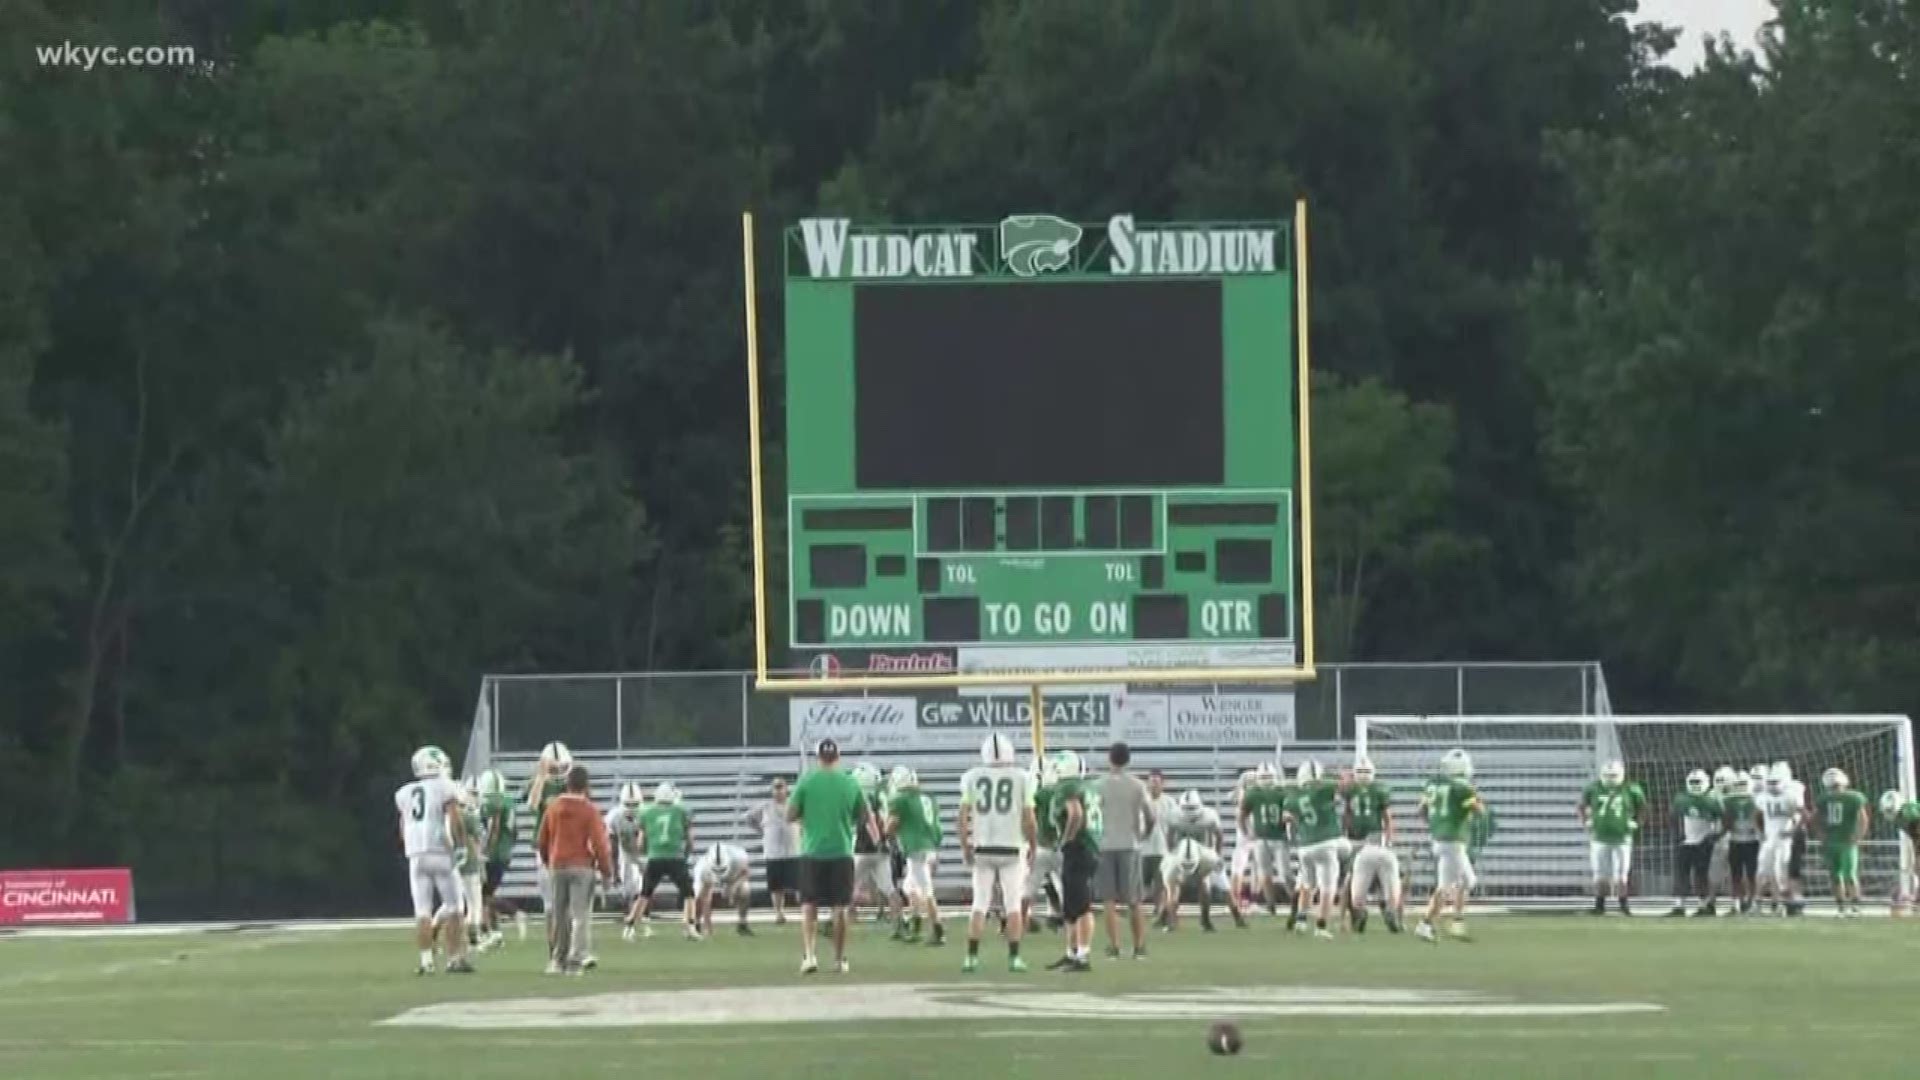 Sept. 5, 2018: It was an extra early start for some students at Mayfield High School as the football team hit the field for practice before school so they could beat the heat.